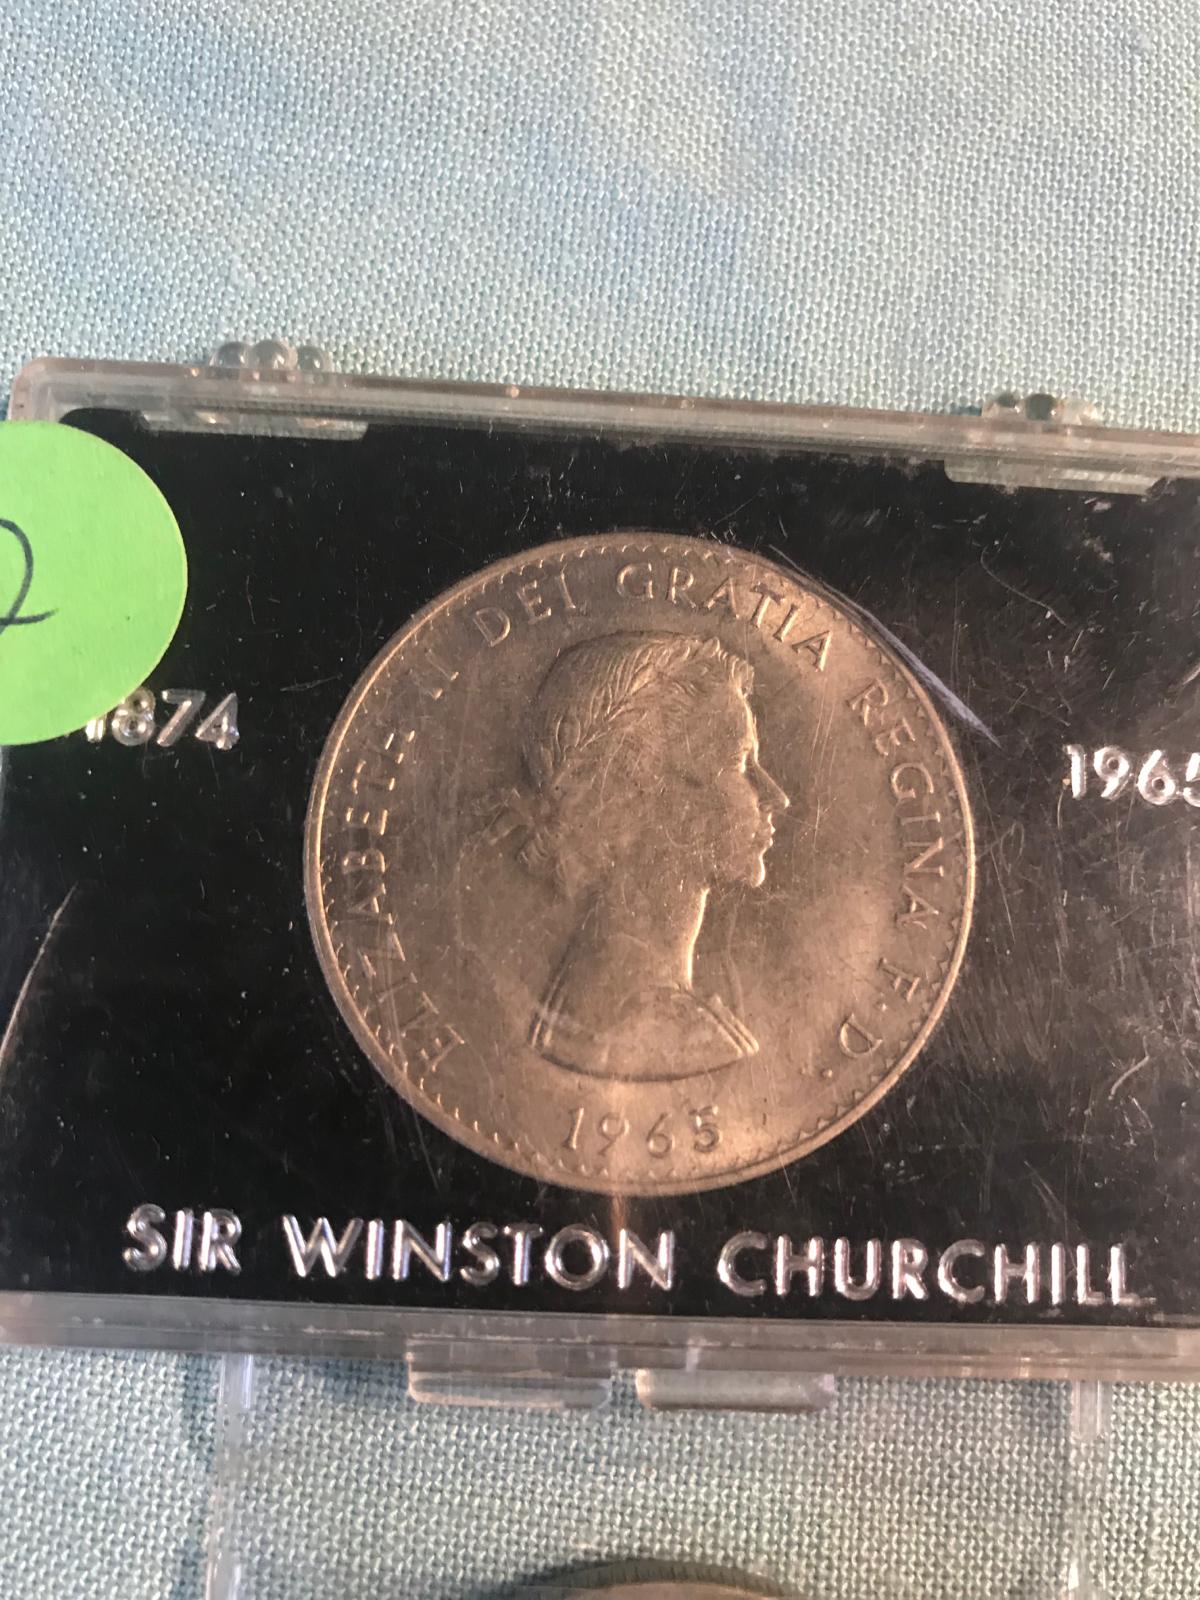 1965 Churchill Coin, and a One Maui Trade Dollar Comm coin